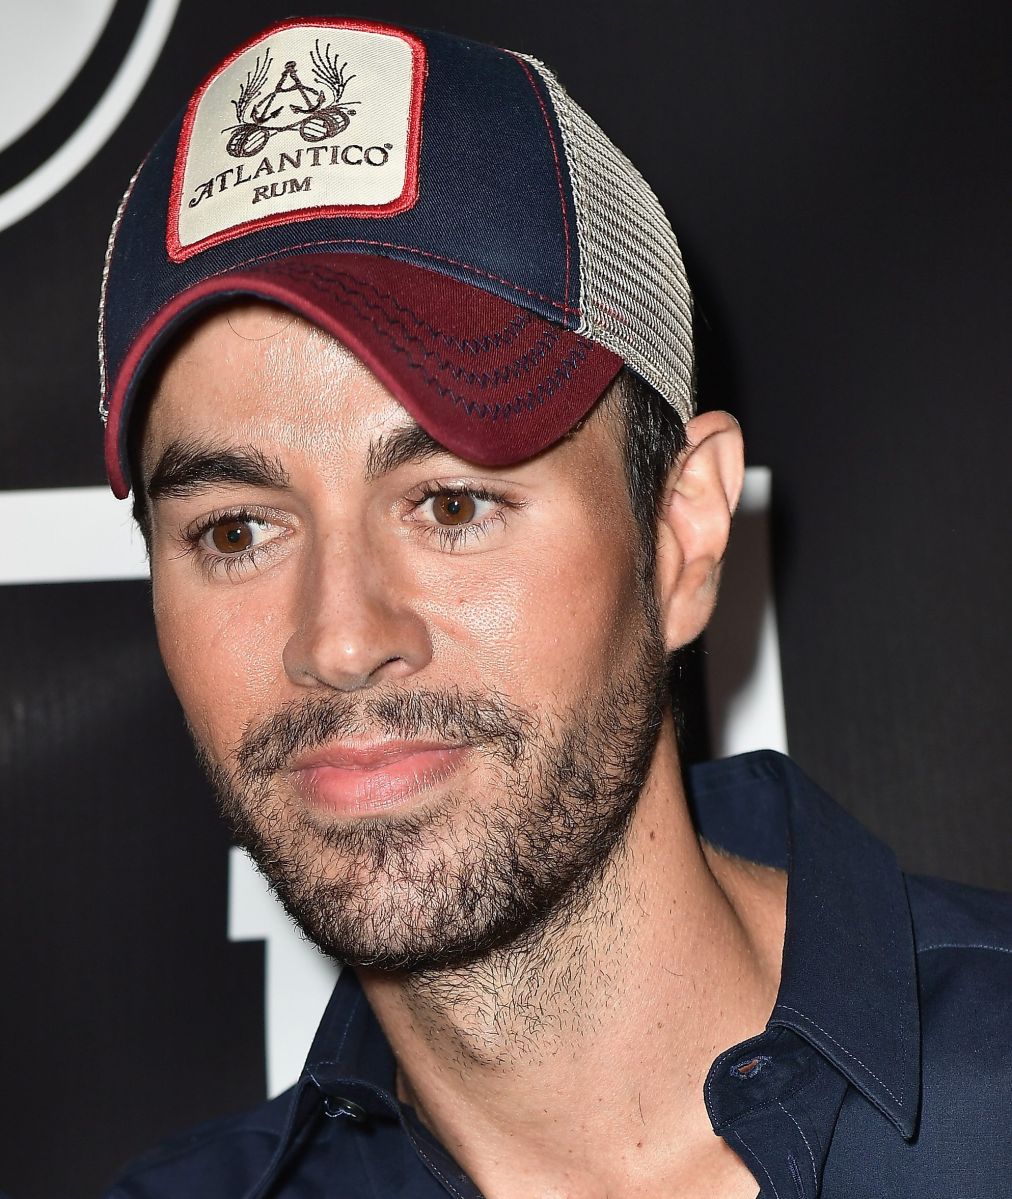 MIAMI BEACH, FL - MARCH 20:  Enrique Iglesias attends the Grand Opening Celebration of TATEL Miami at TATEL Miami on March 20, 2017 in Miami Beach, Florida.  (Photo by Gustavo Caballero/Getty Images)